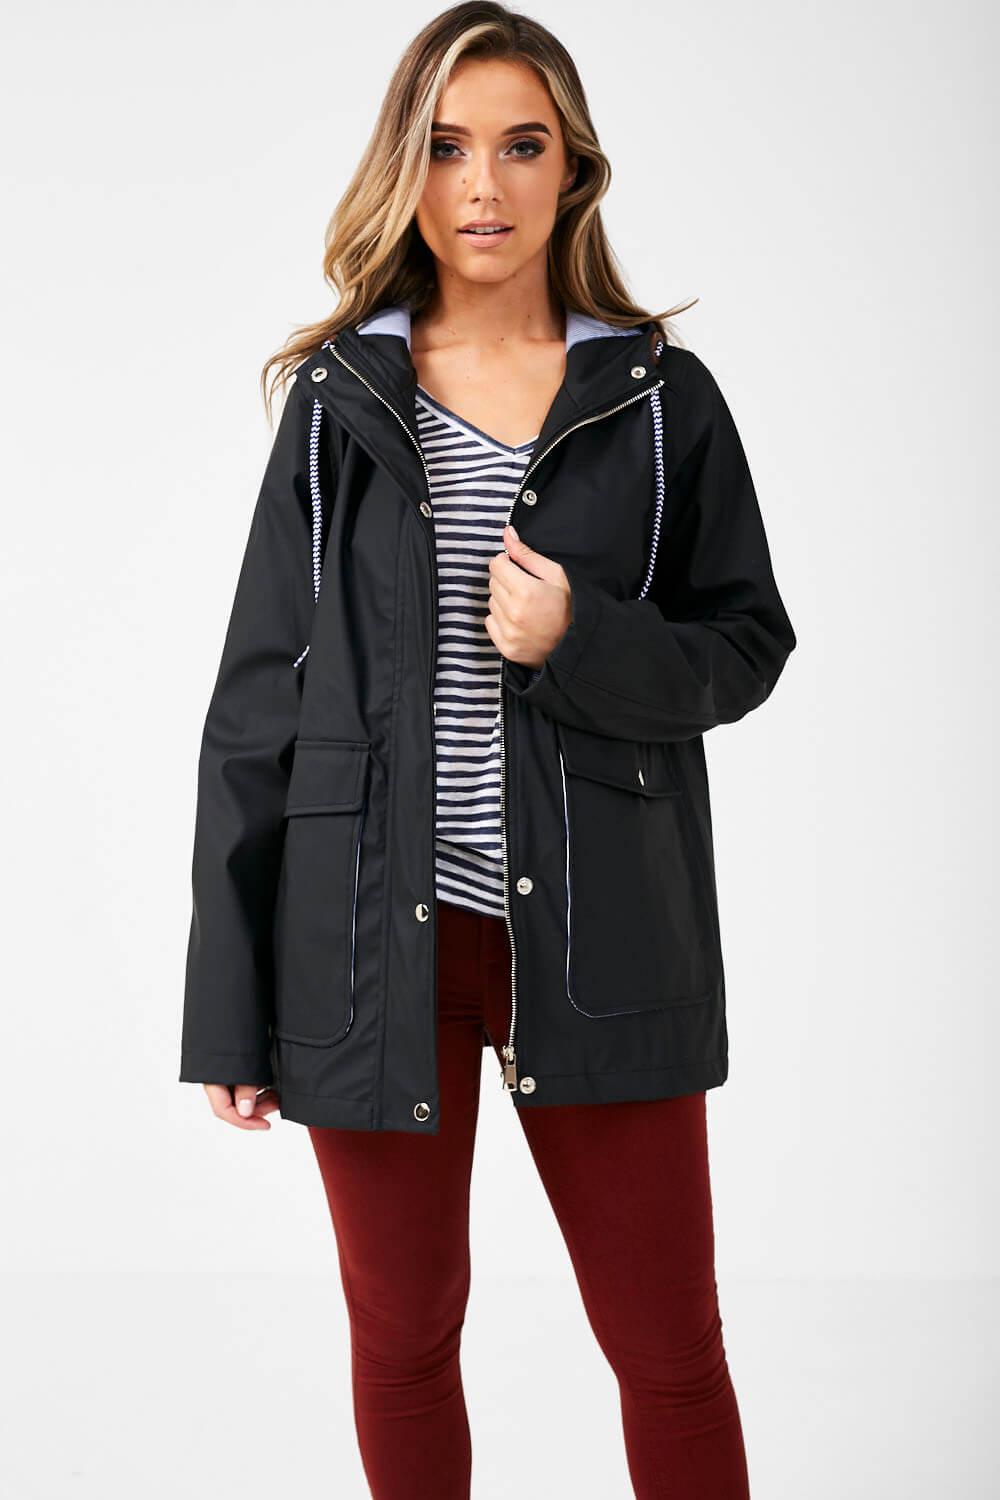 Lilly Stripe Lined Raincoat in Black | iCLOTHING - iCLOTHING